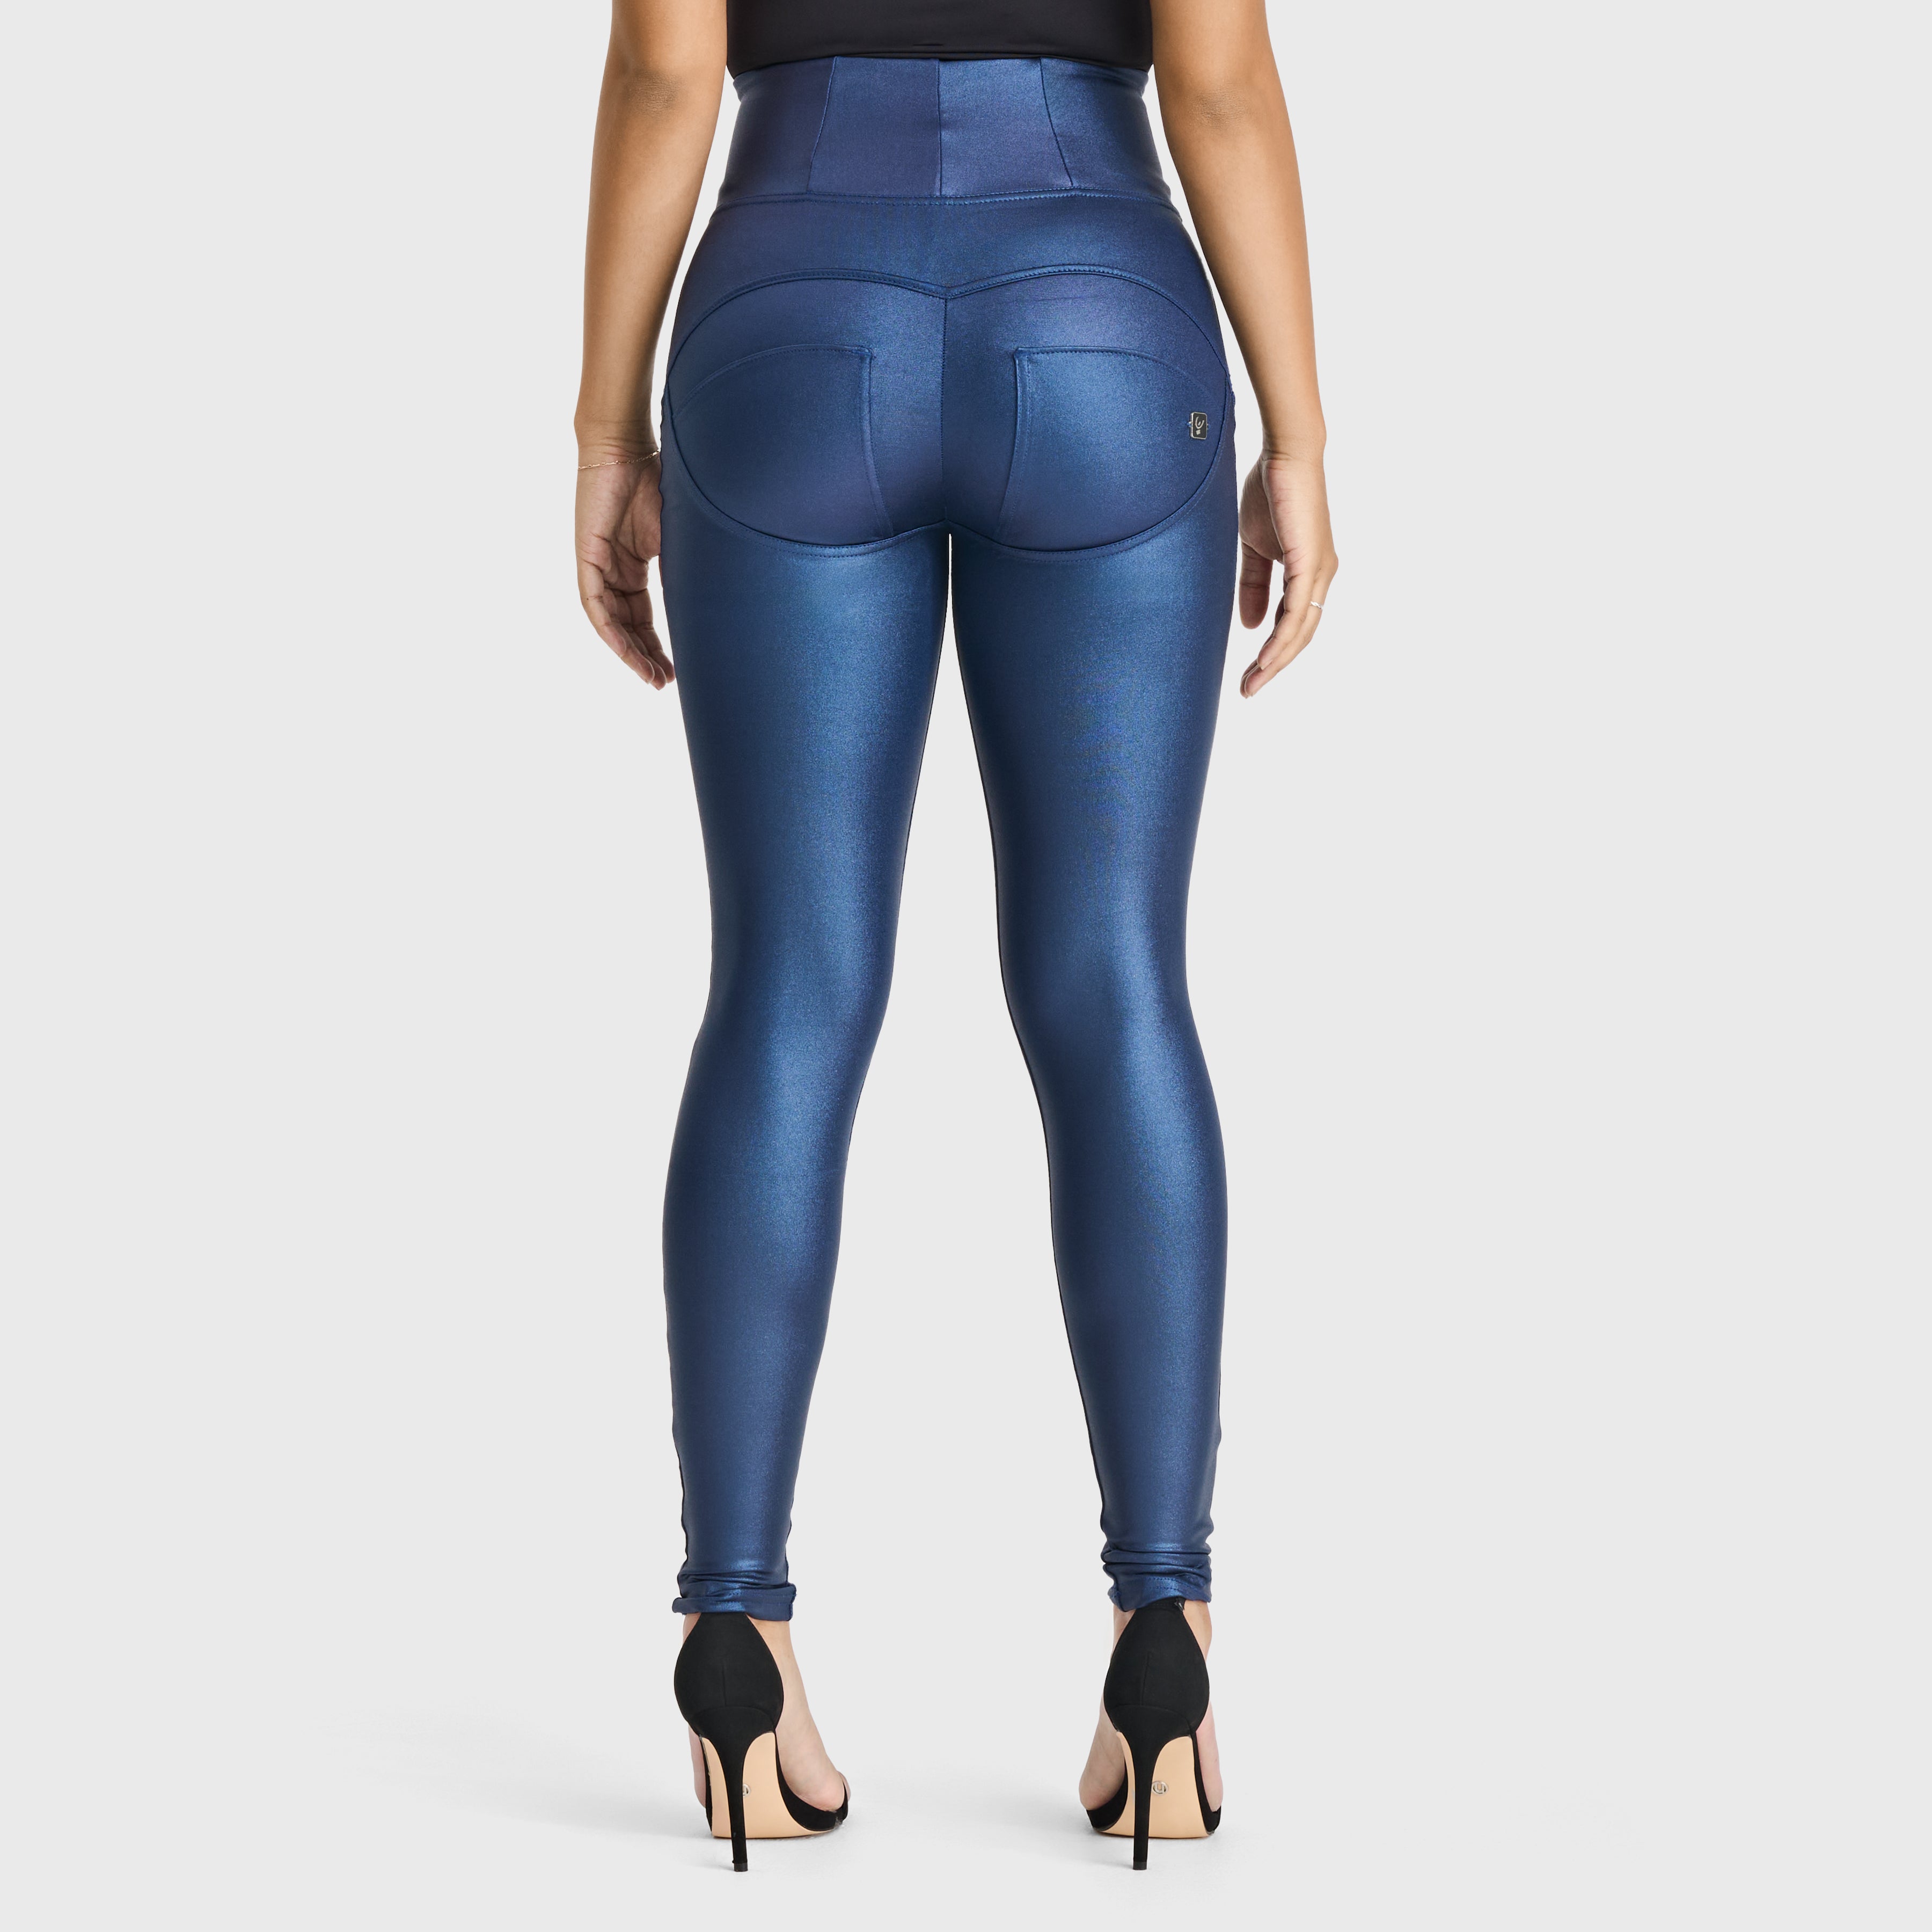 WR.UP® Disco Pants - Super High Waisted - Full Length - Navy Blue 3